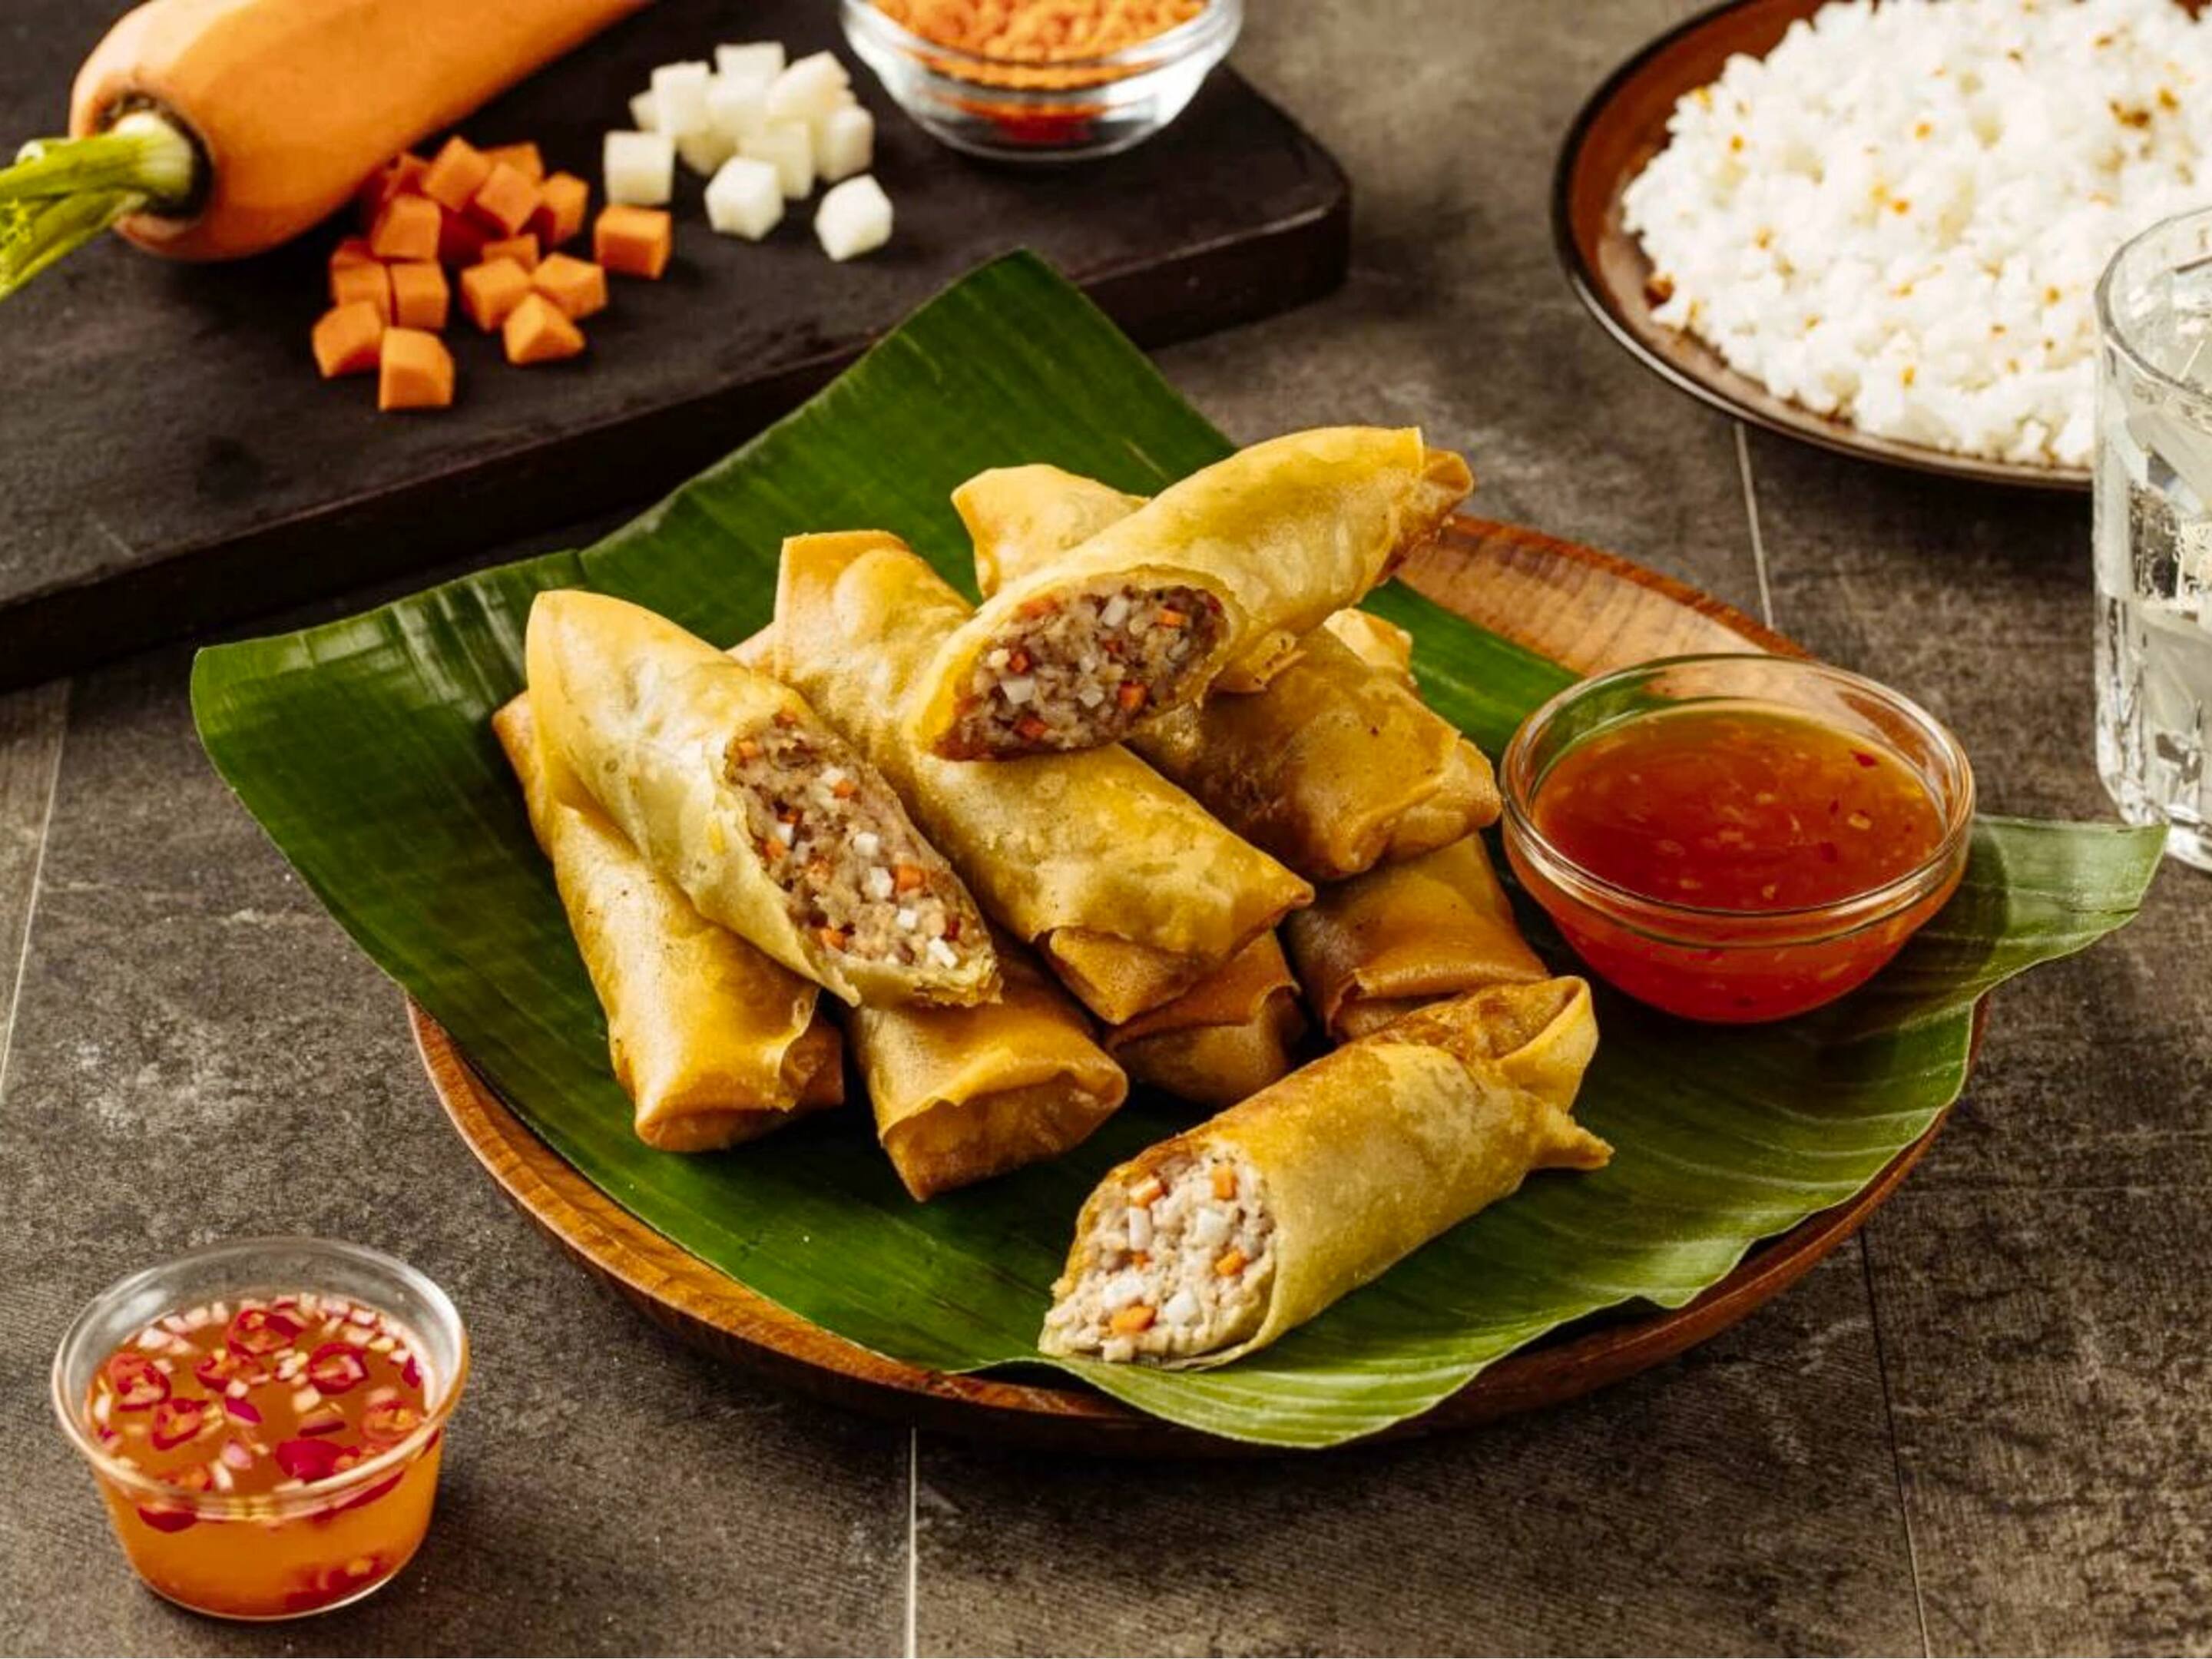 Lumpiang shanghai served with sweet chili sauce on a banana leaf